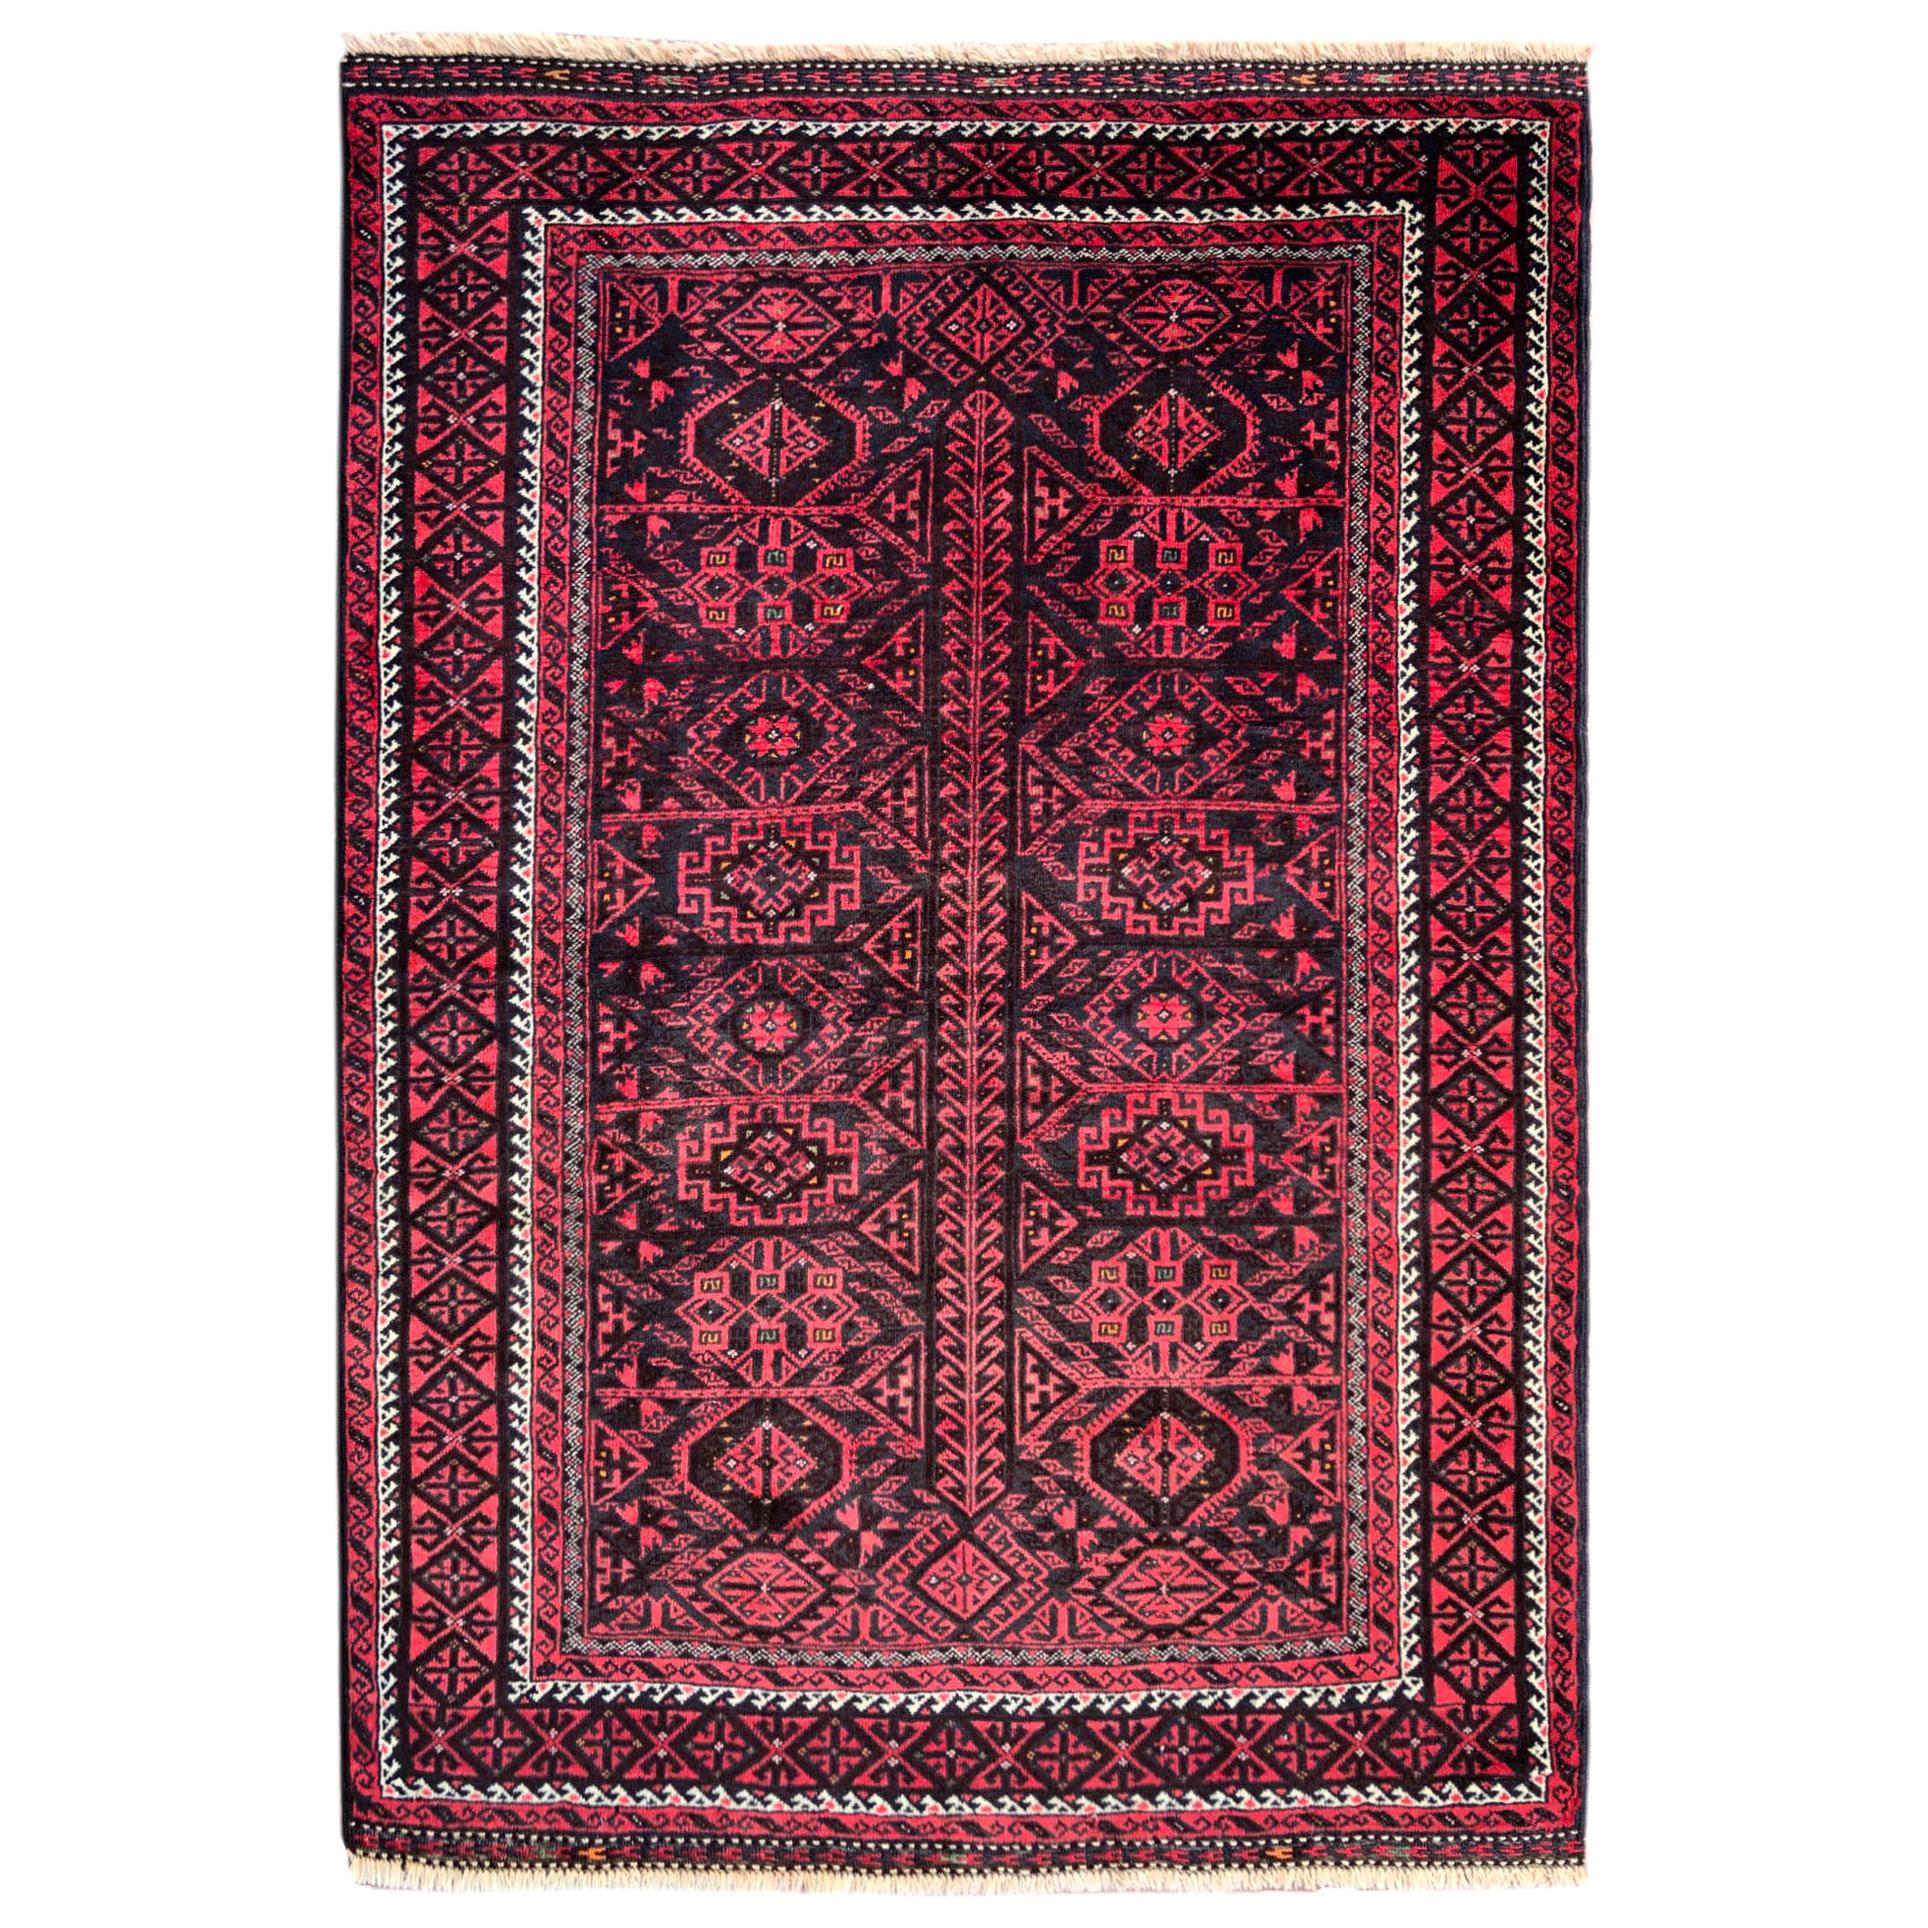 Authentic Persian Hand Knotted Geometric All-Over Red Black Baluchi Rug, 1960 For Sale